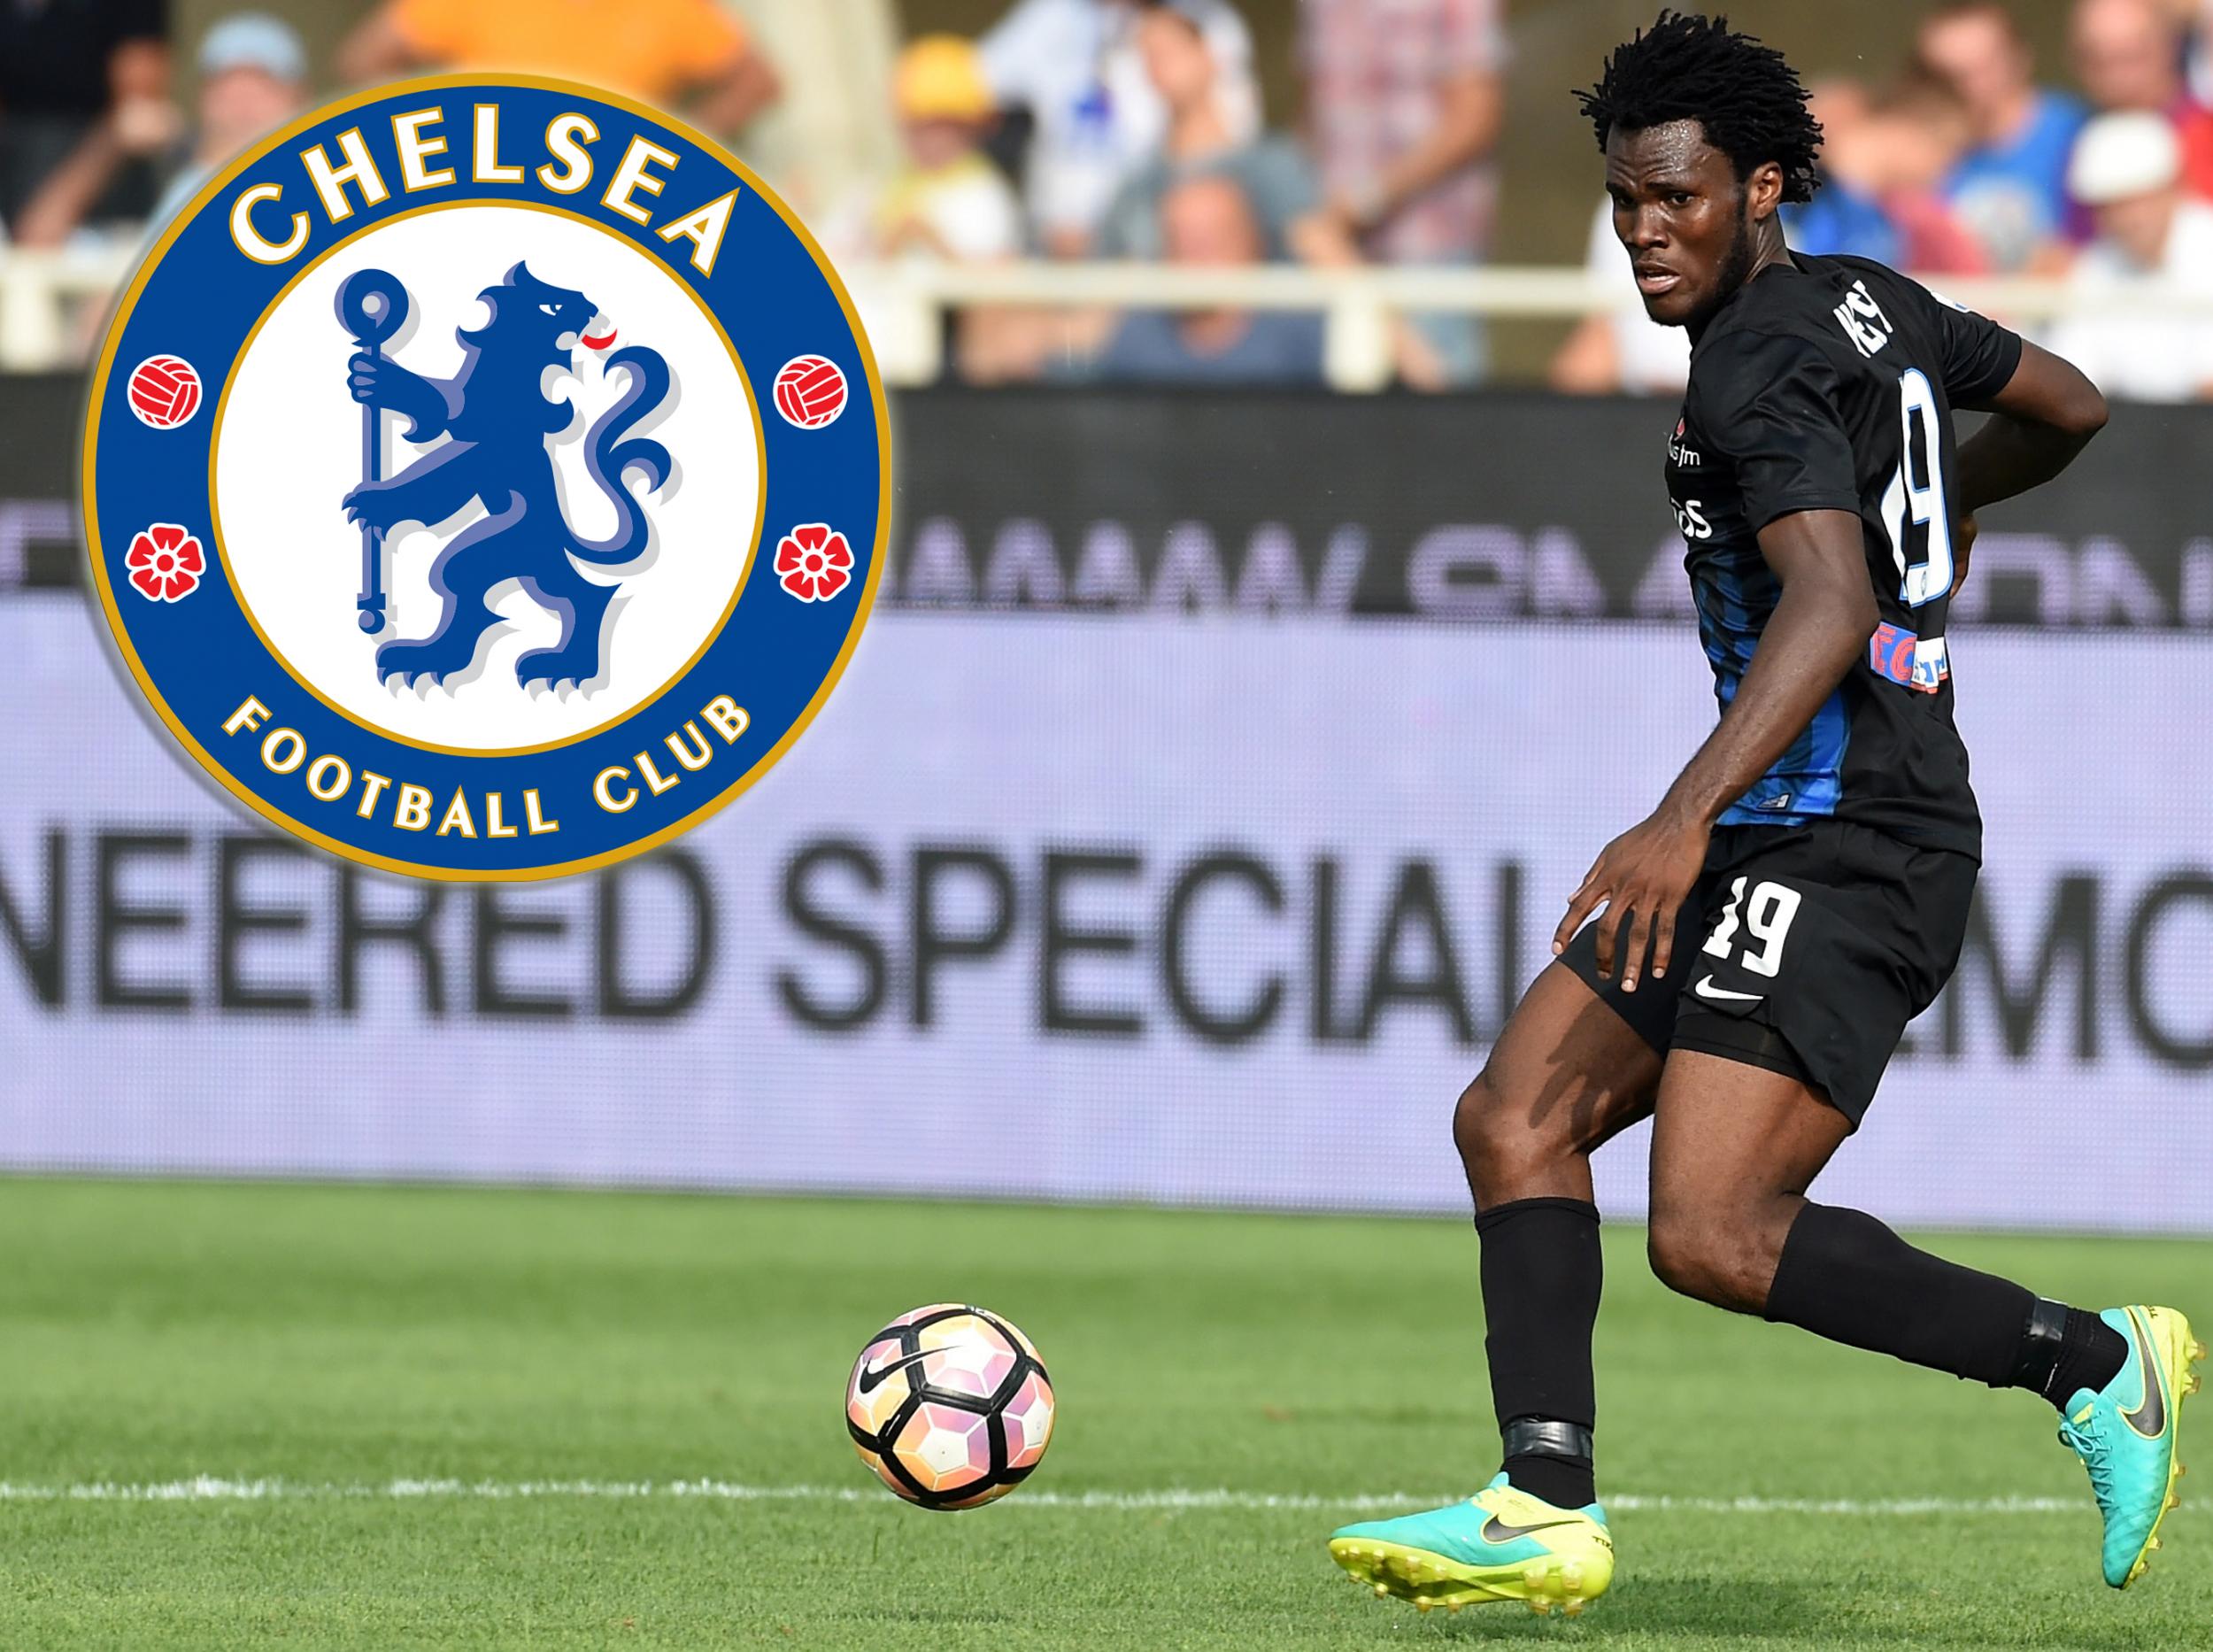 Chelsea have been linked with a move for young Ivorian midfielder Kessie